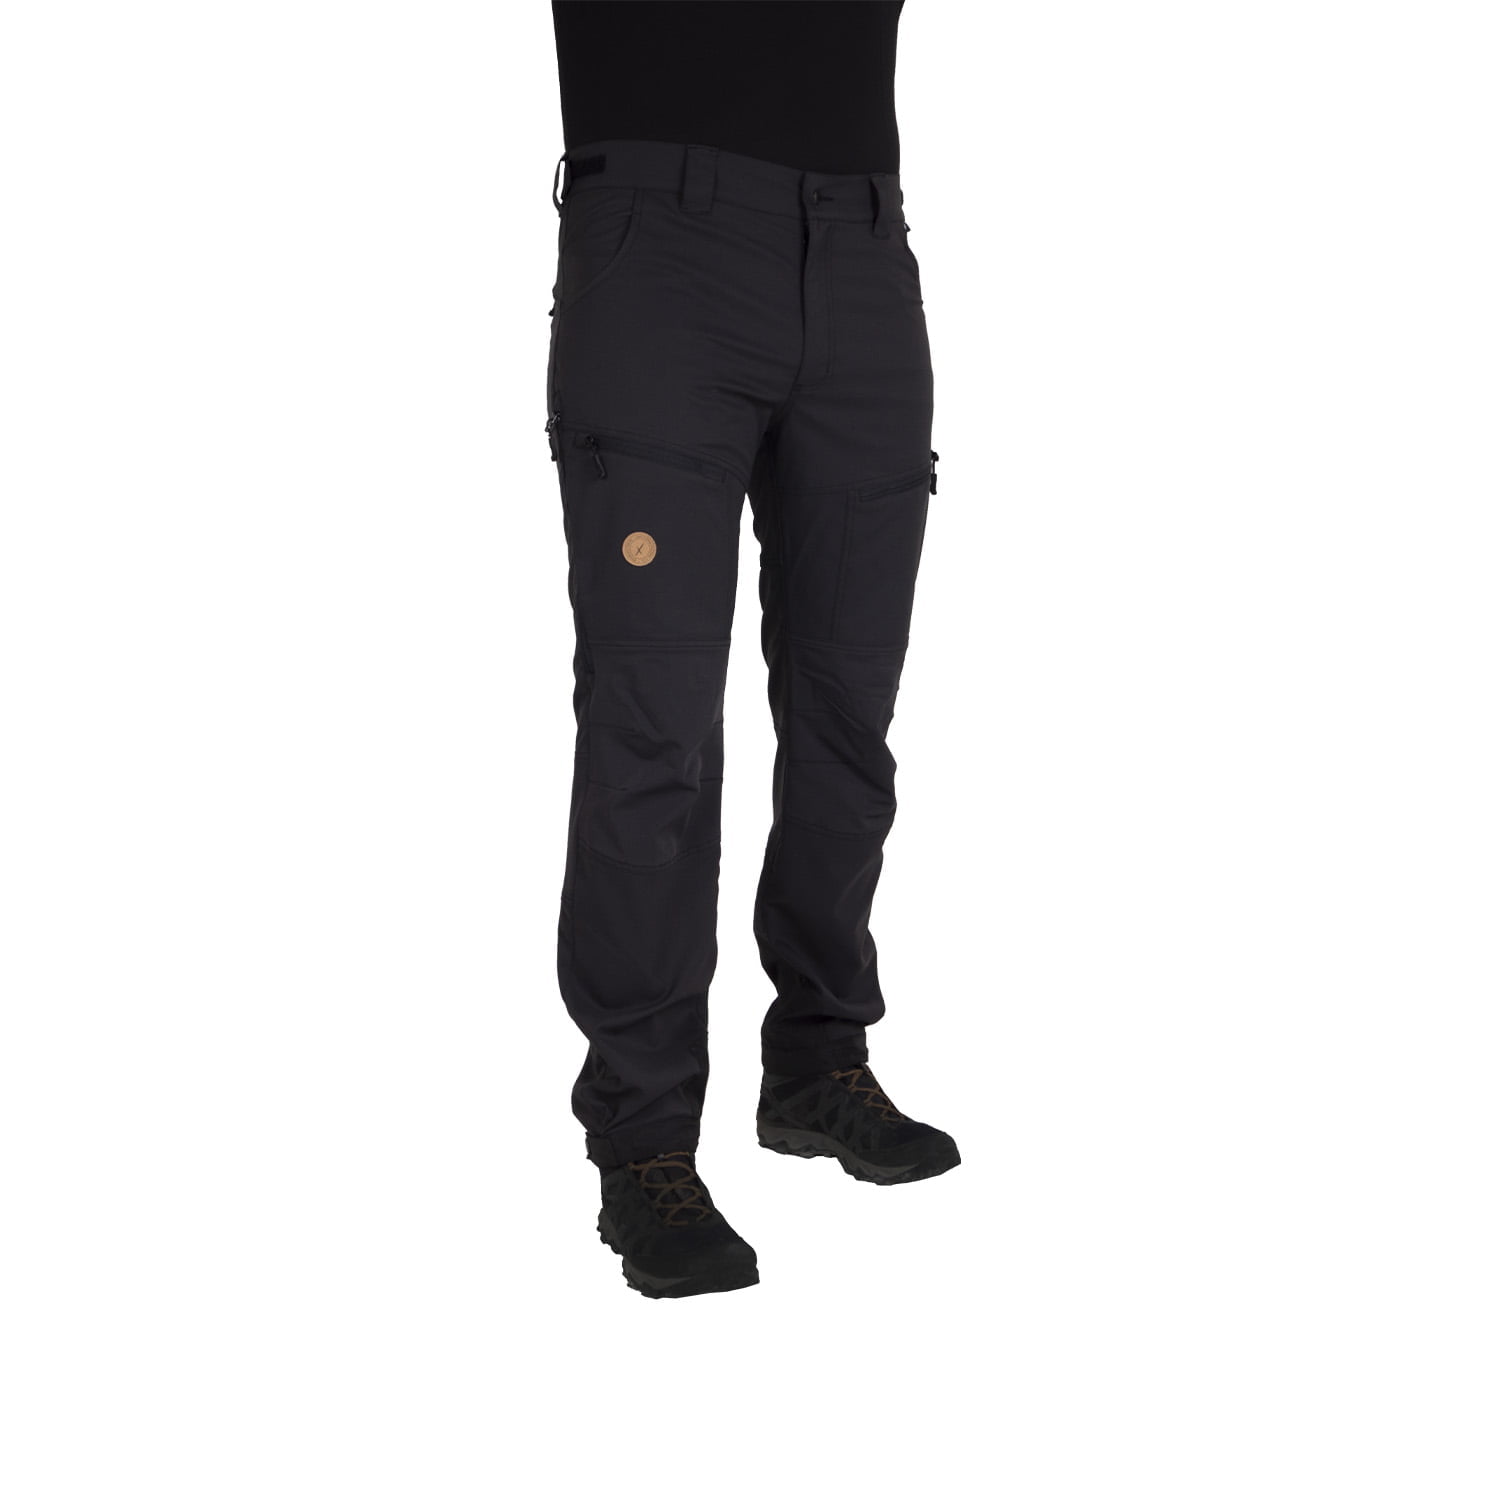 Nokko Black outdoor trousers for men shown from the front on the model